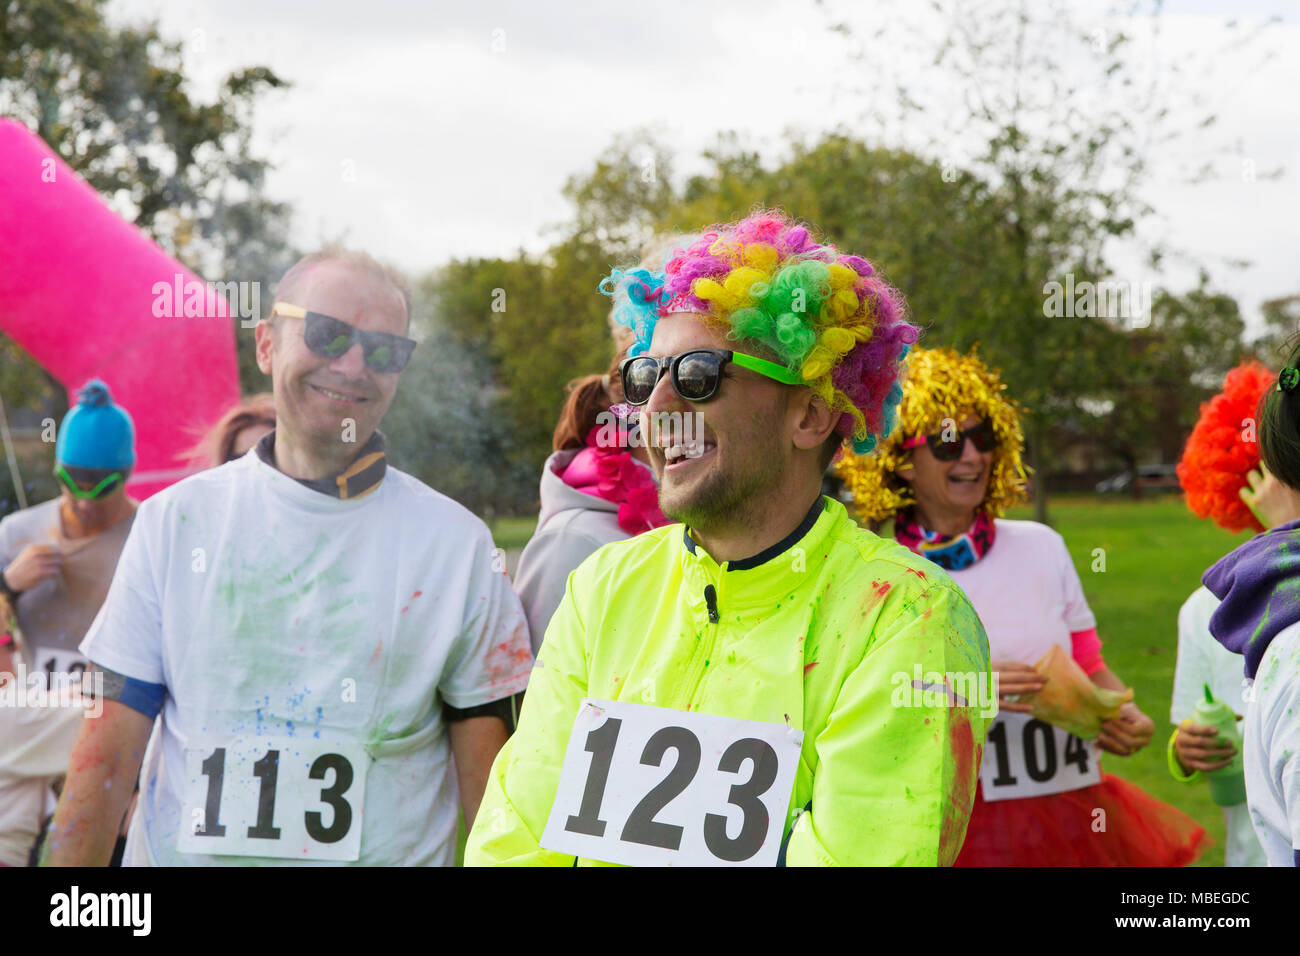 Playful runner in wig at charity run in park Stock Photo